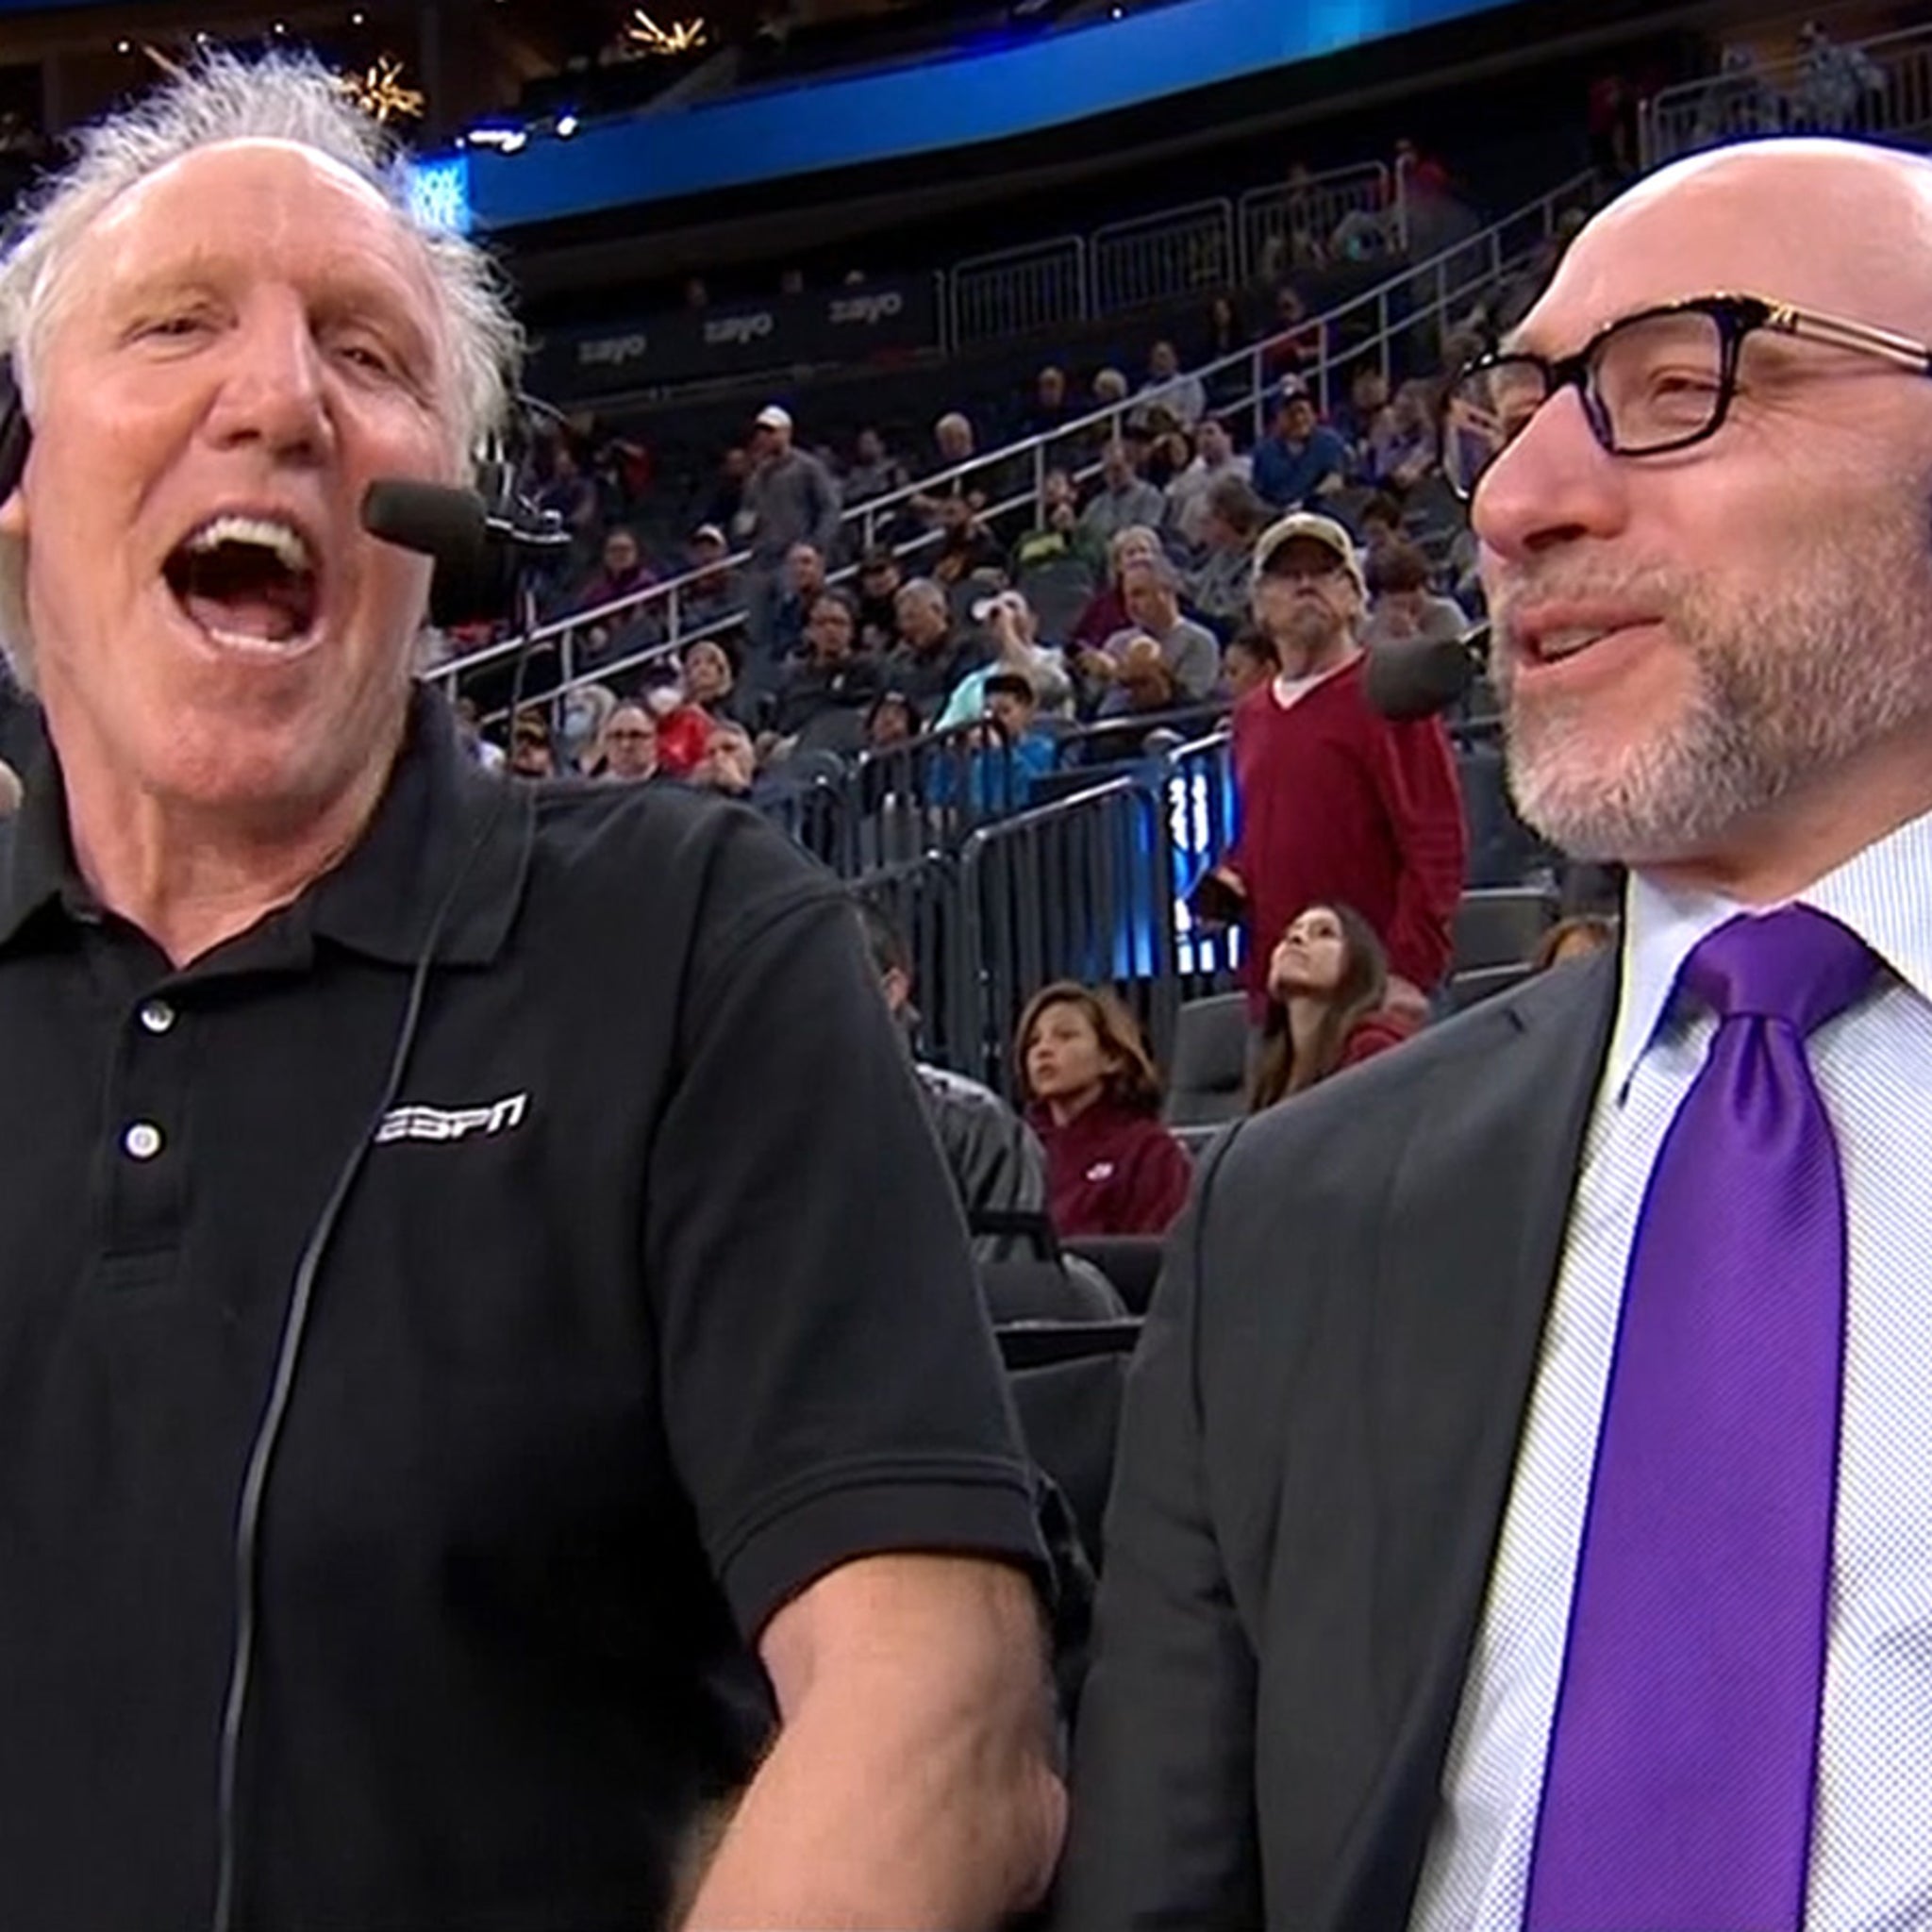 Tonight, I will not sleep.' Bill Walton: A text exchange, a call, and the  tao of Bill - The Athletic